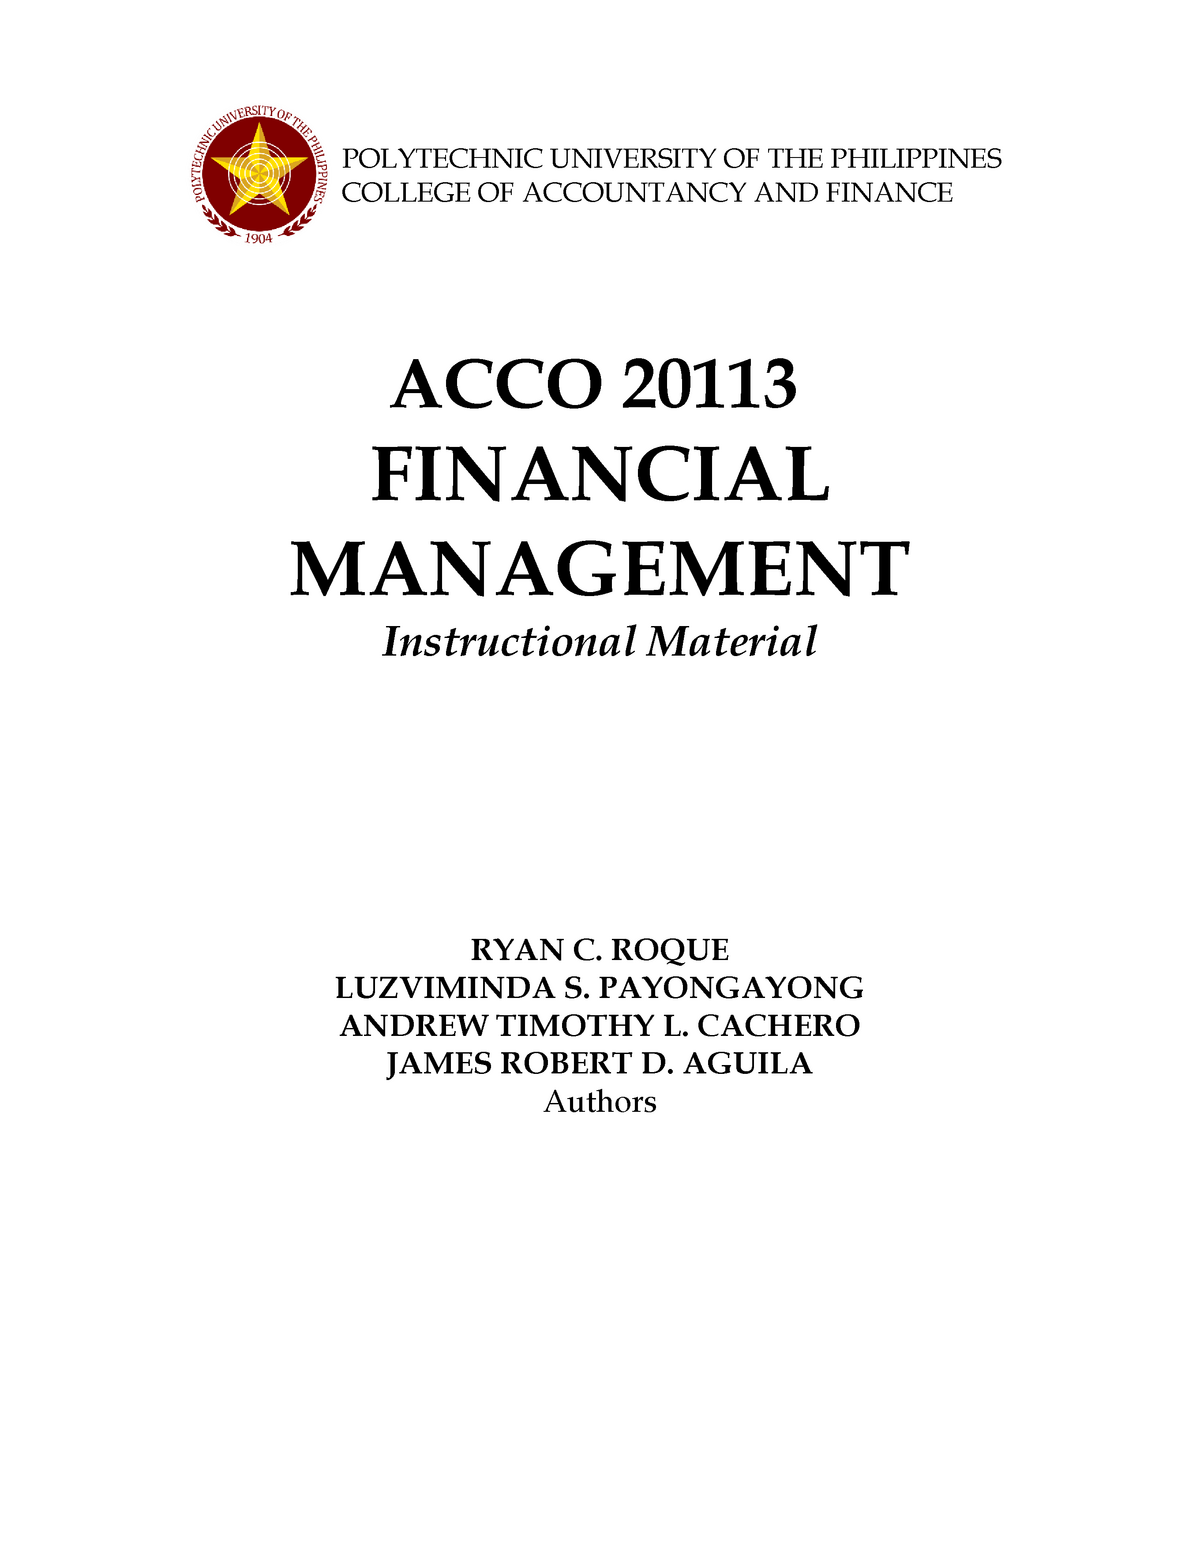 thesis title for financial management student in the philippines